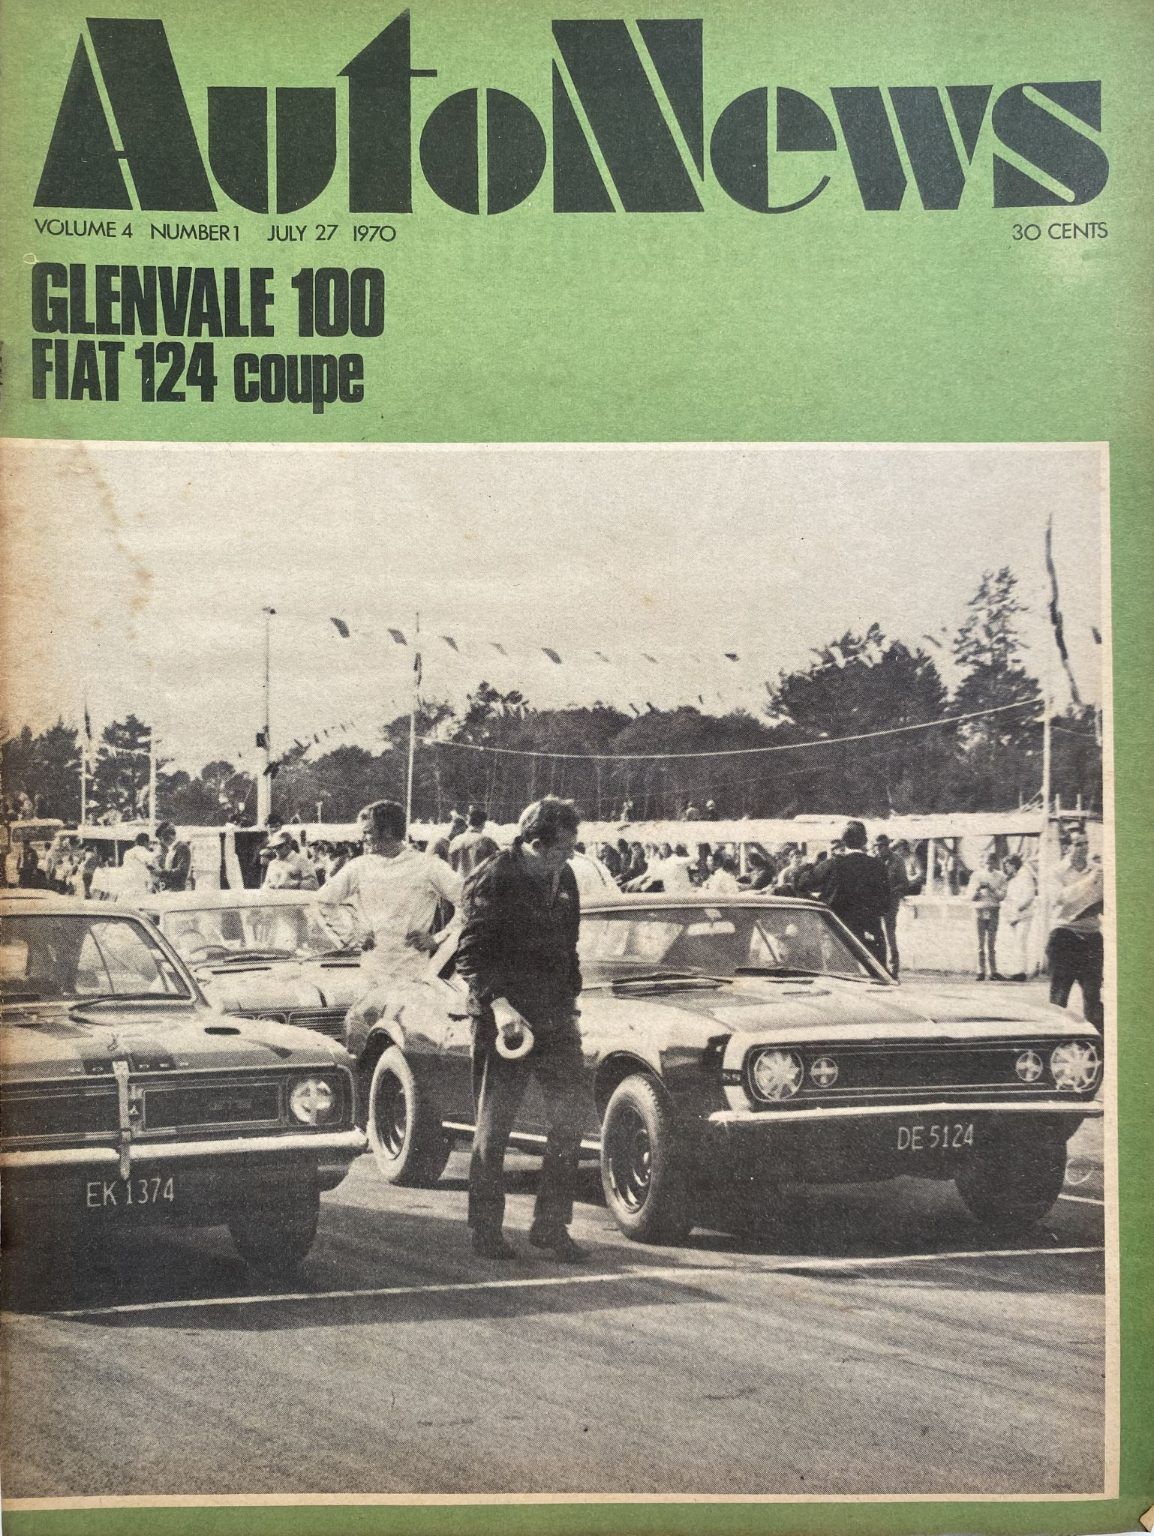 OLD MAGAZINE: Auto News - Vol. 4, Number 1, 27th July 1970